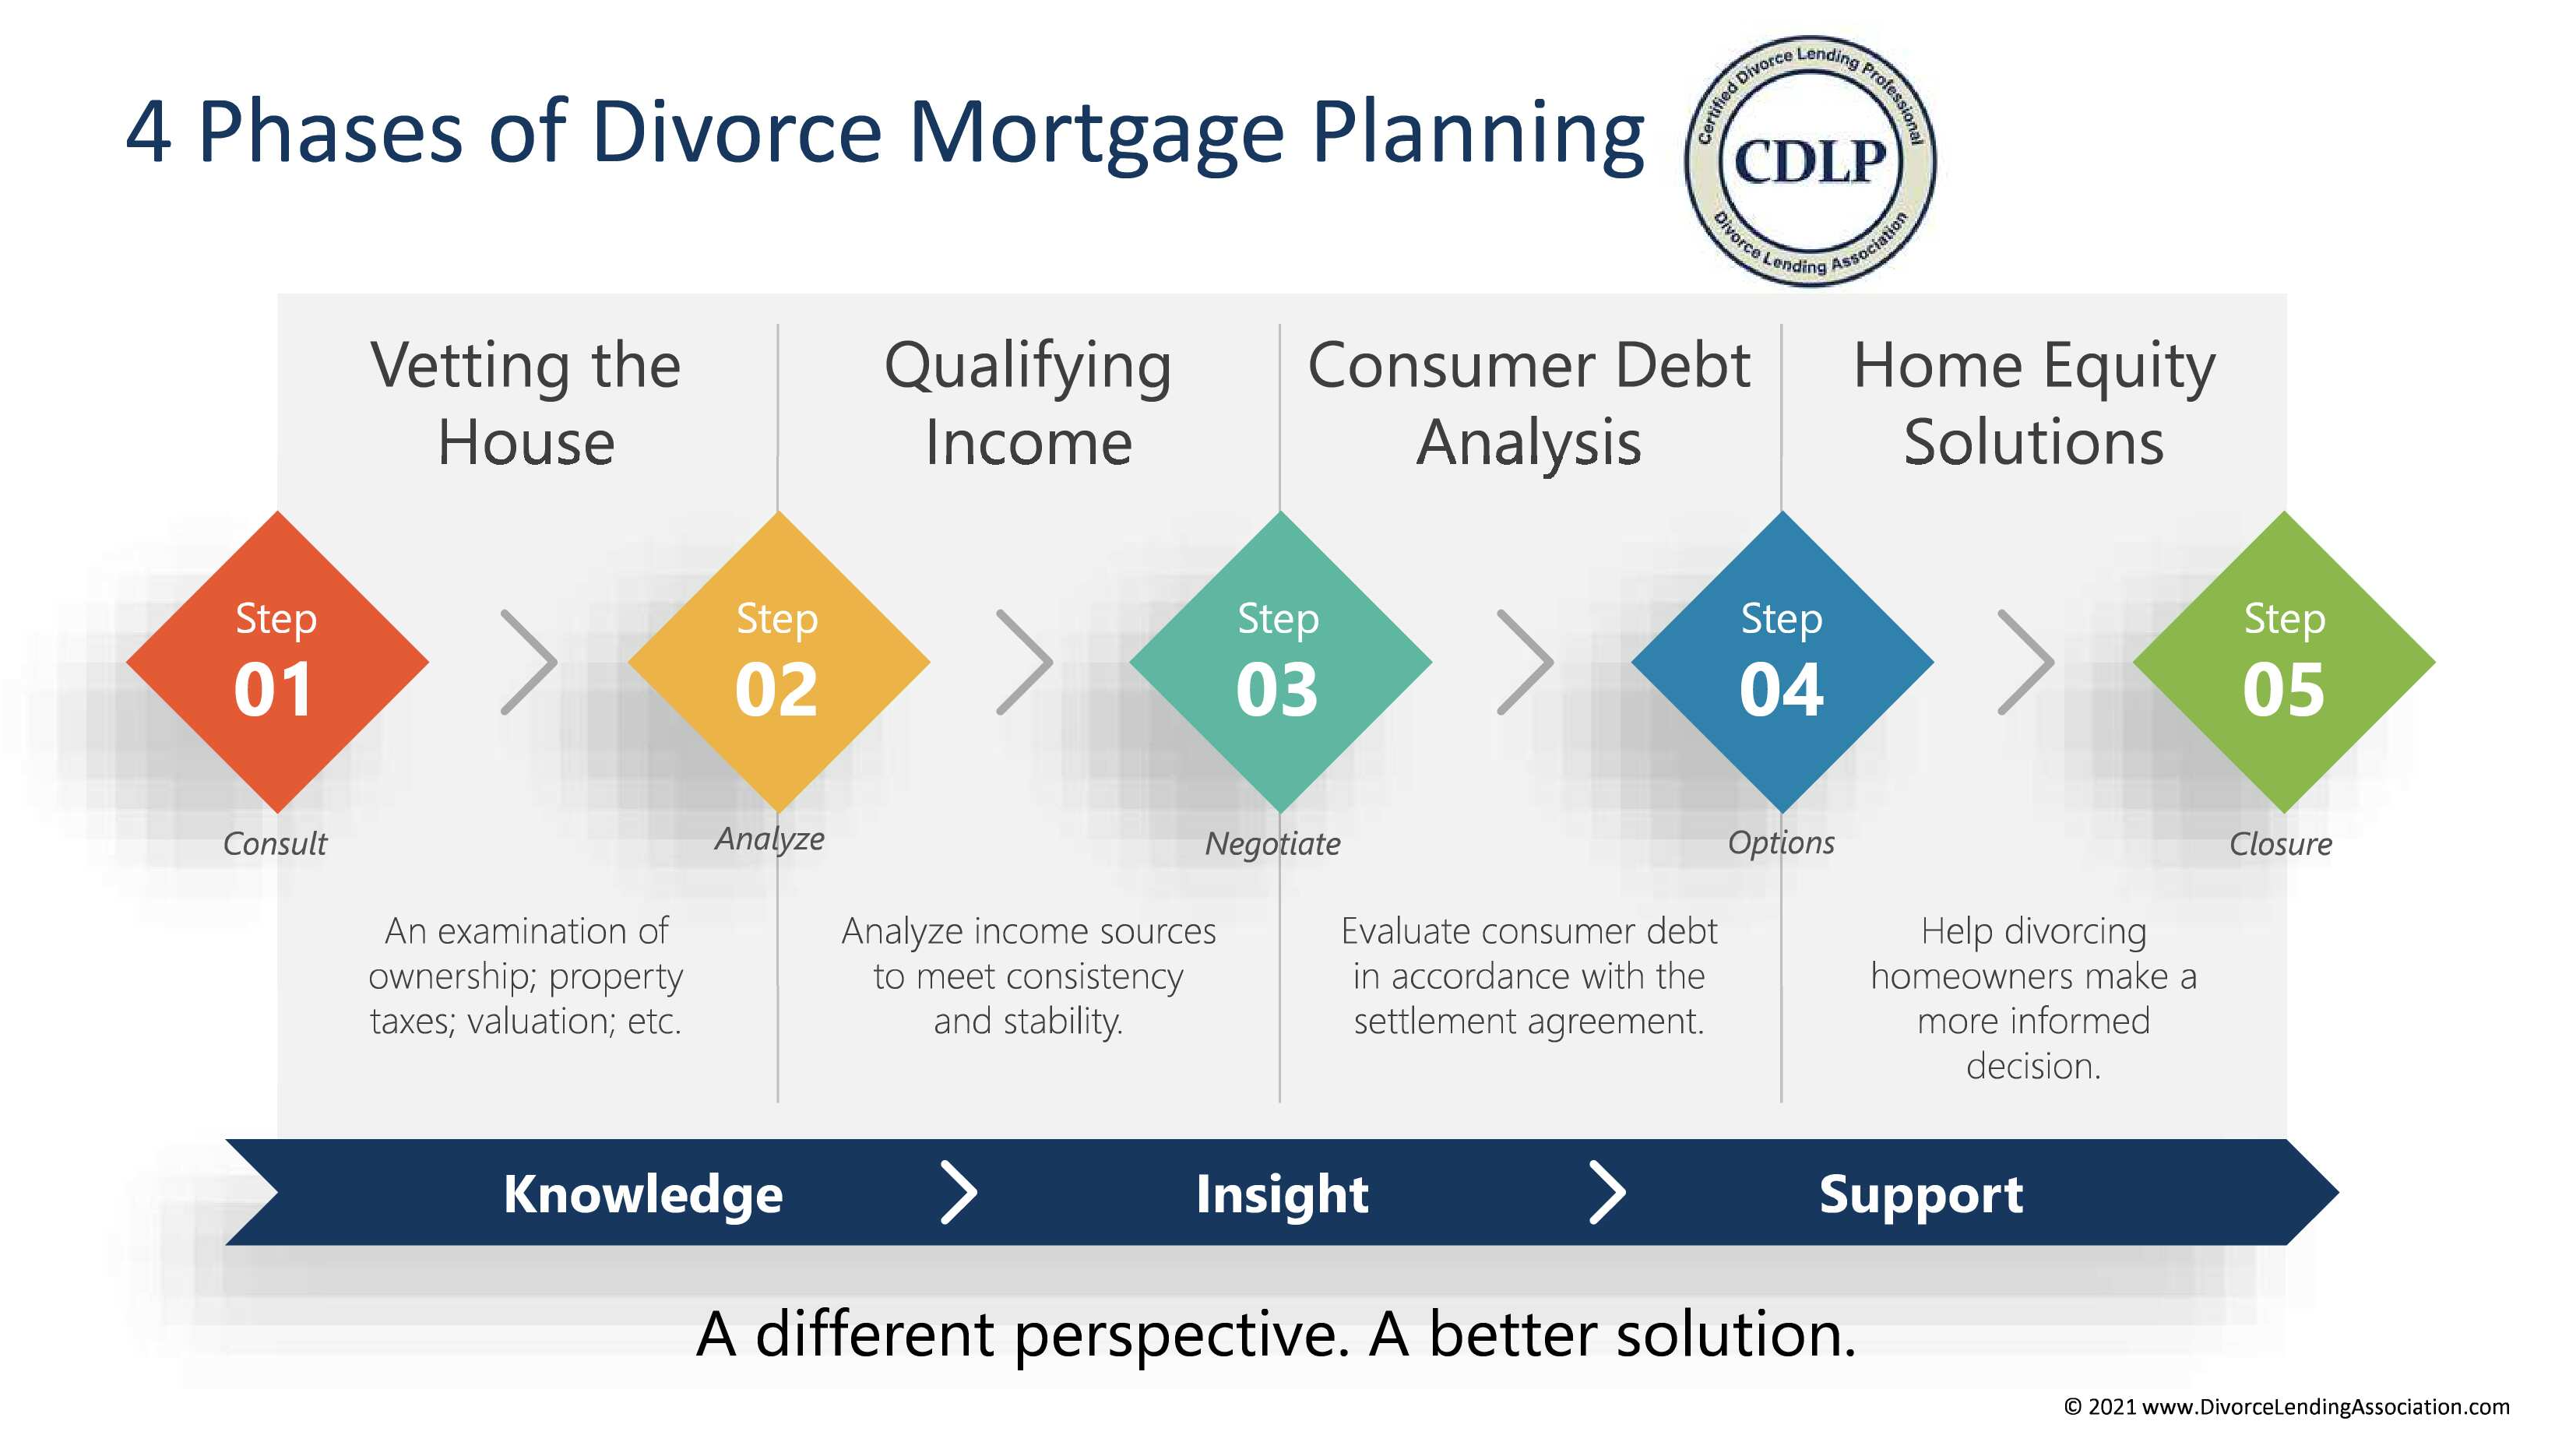 4 Phases of Divorce Mortgage Planning